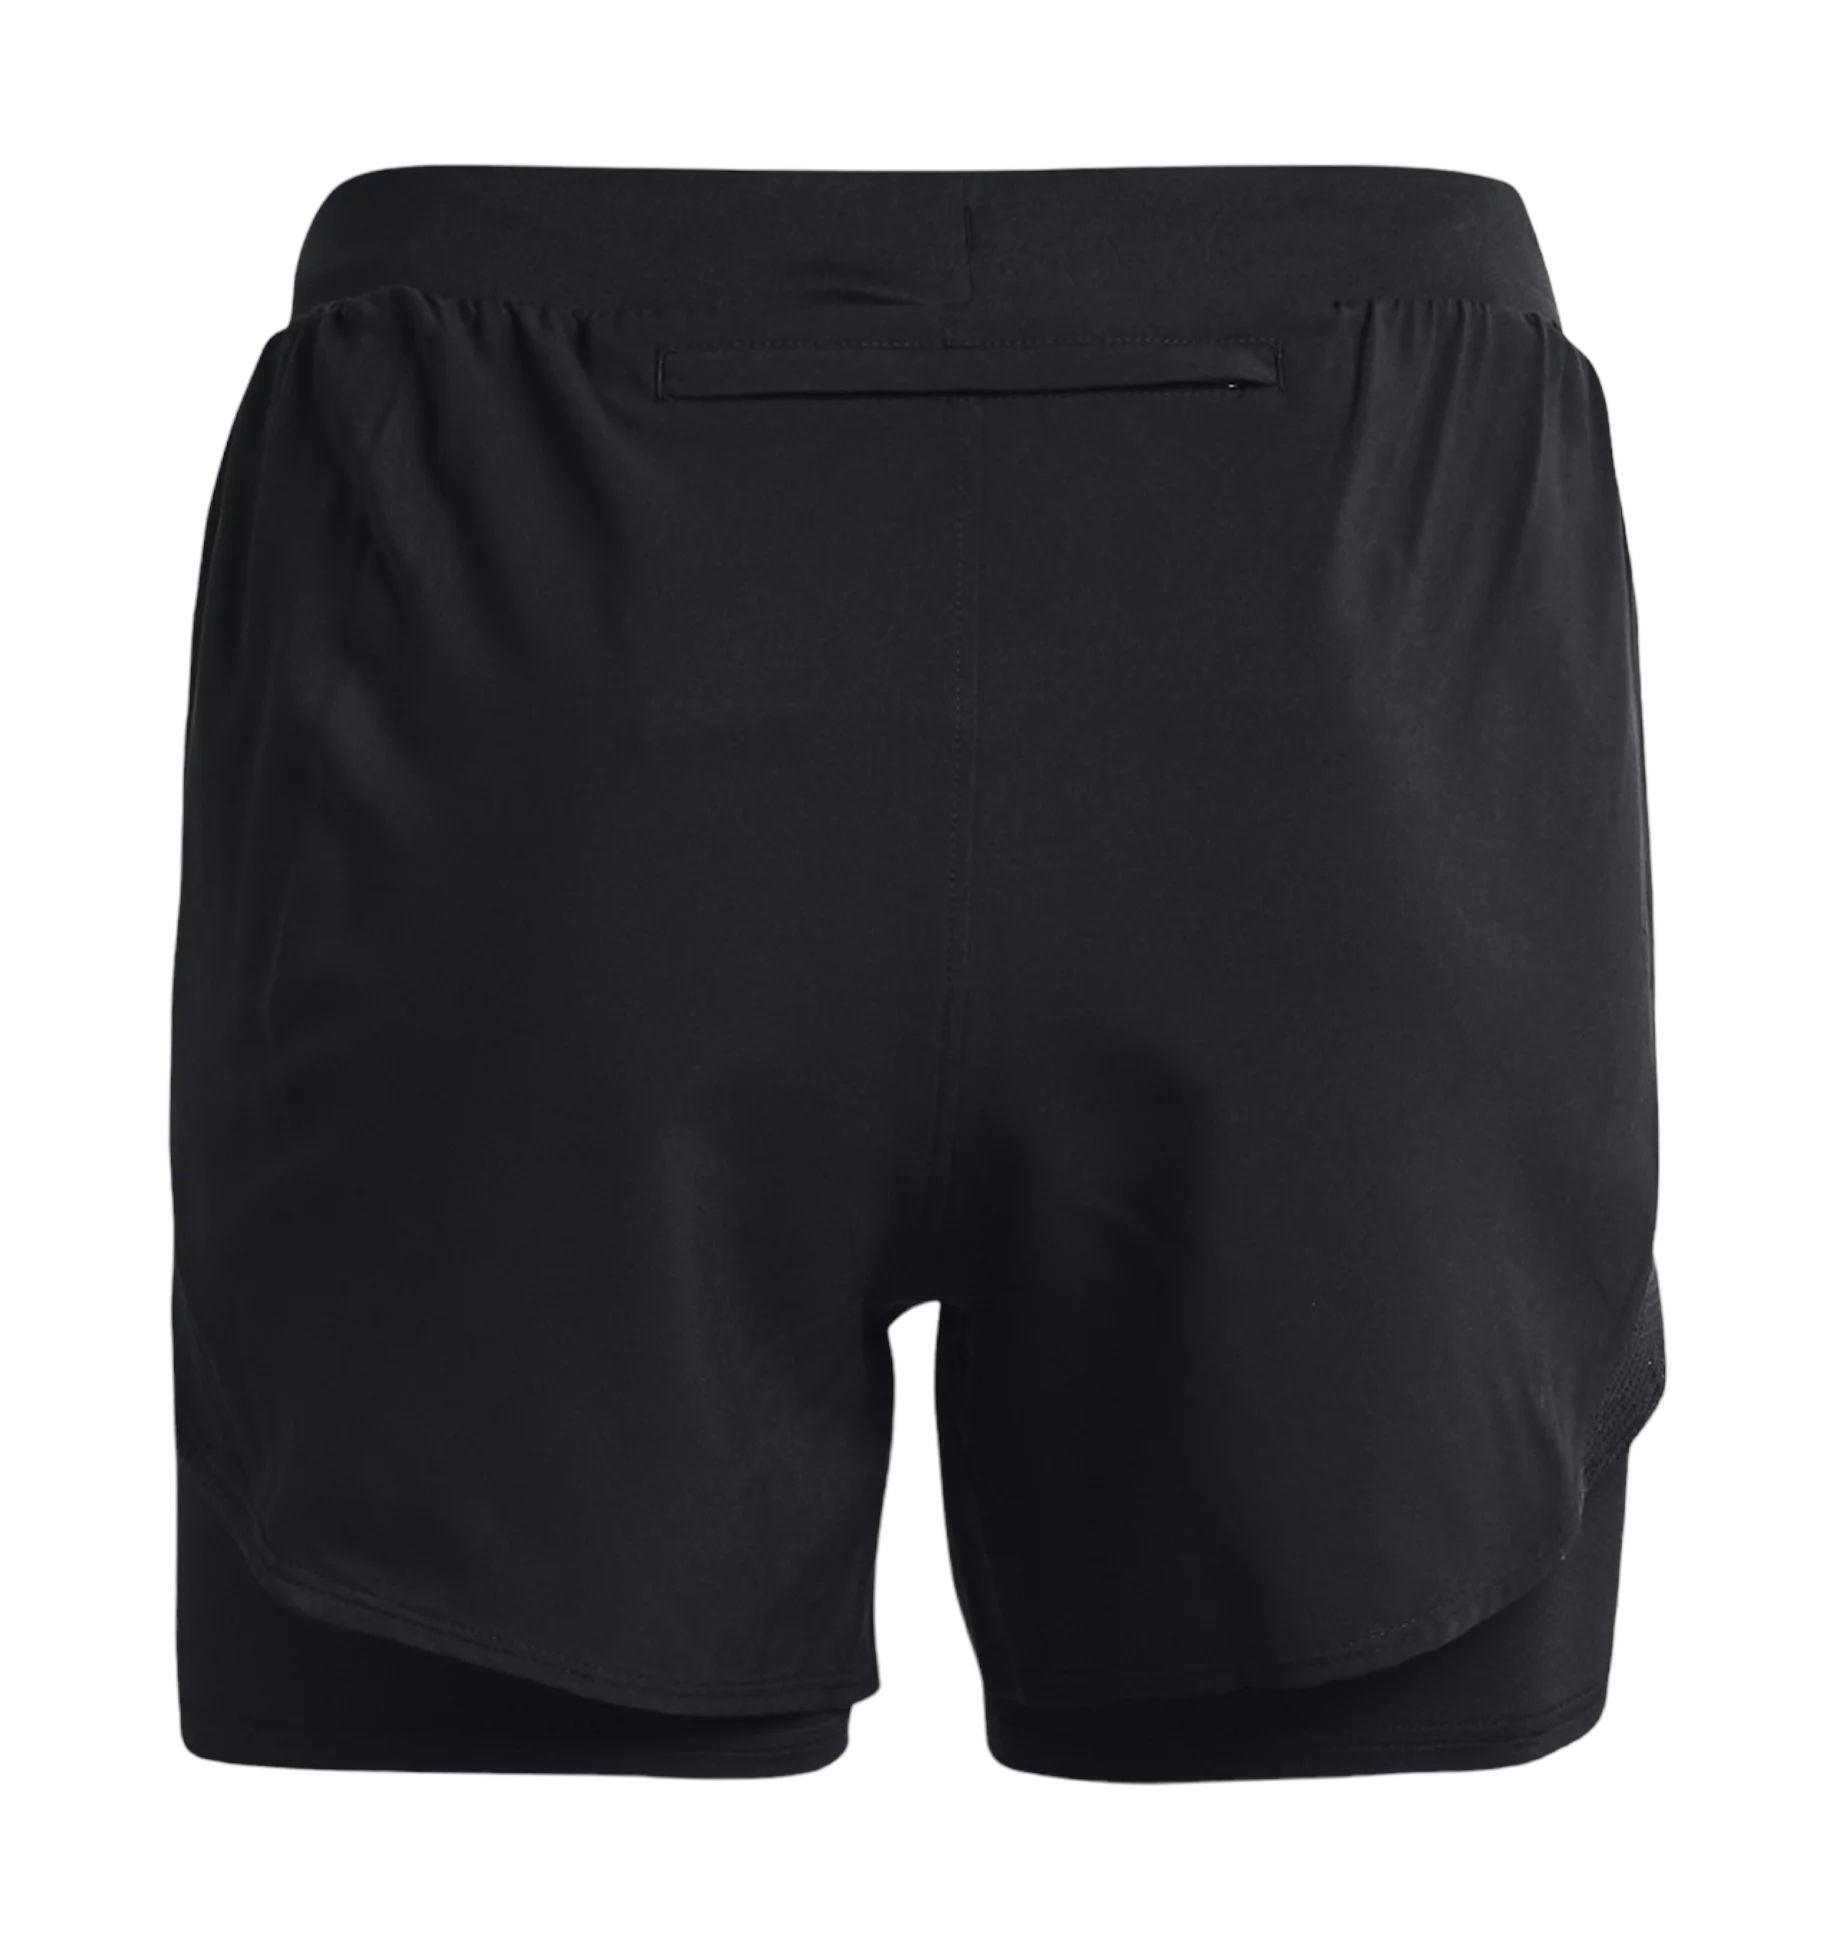 Under Armour | Pantaloncini Fly-By Elite 2-in-1 Donna Black/Reflective - Fabbrica Ski Sises